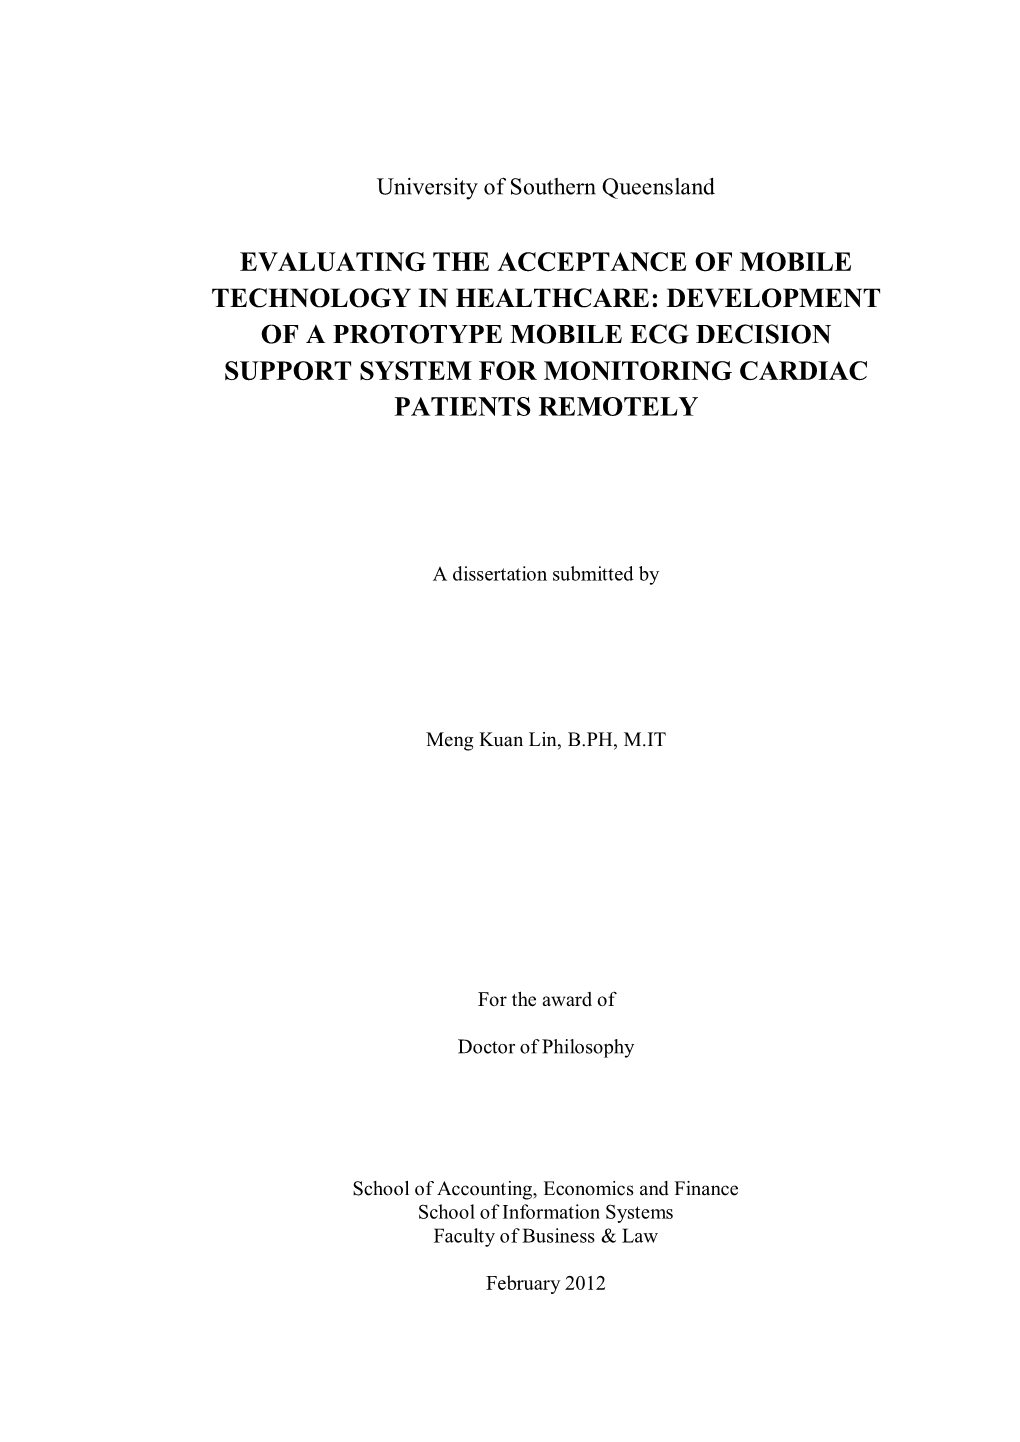 Evaluating the Acceptance of Mobile Technology in Healthcare: Development of a Prototype Mobile Ecg Decision Support System for Monitoring Cardiac Patients Remotely